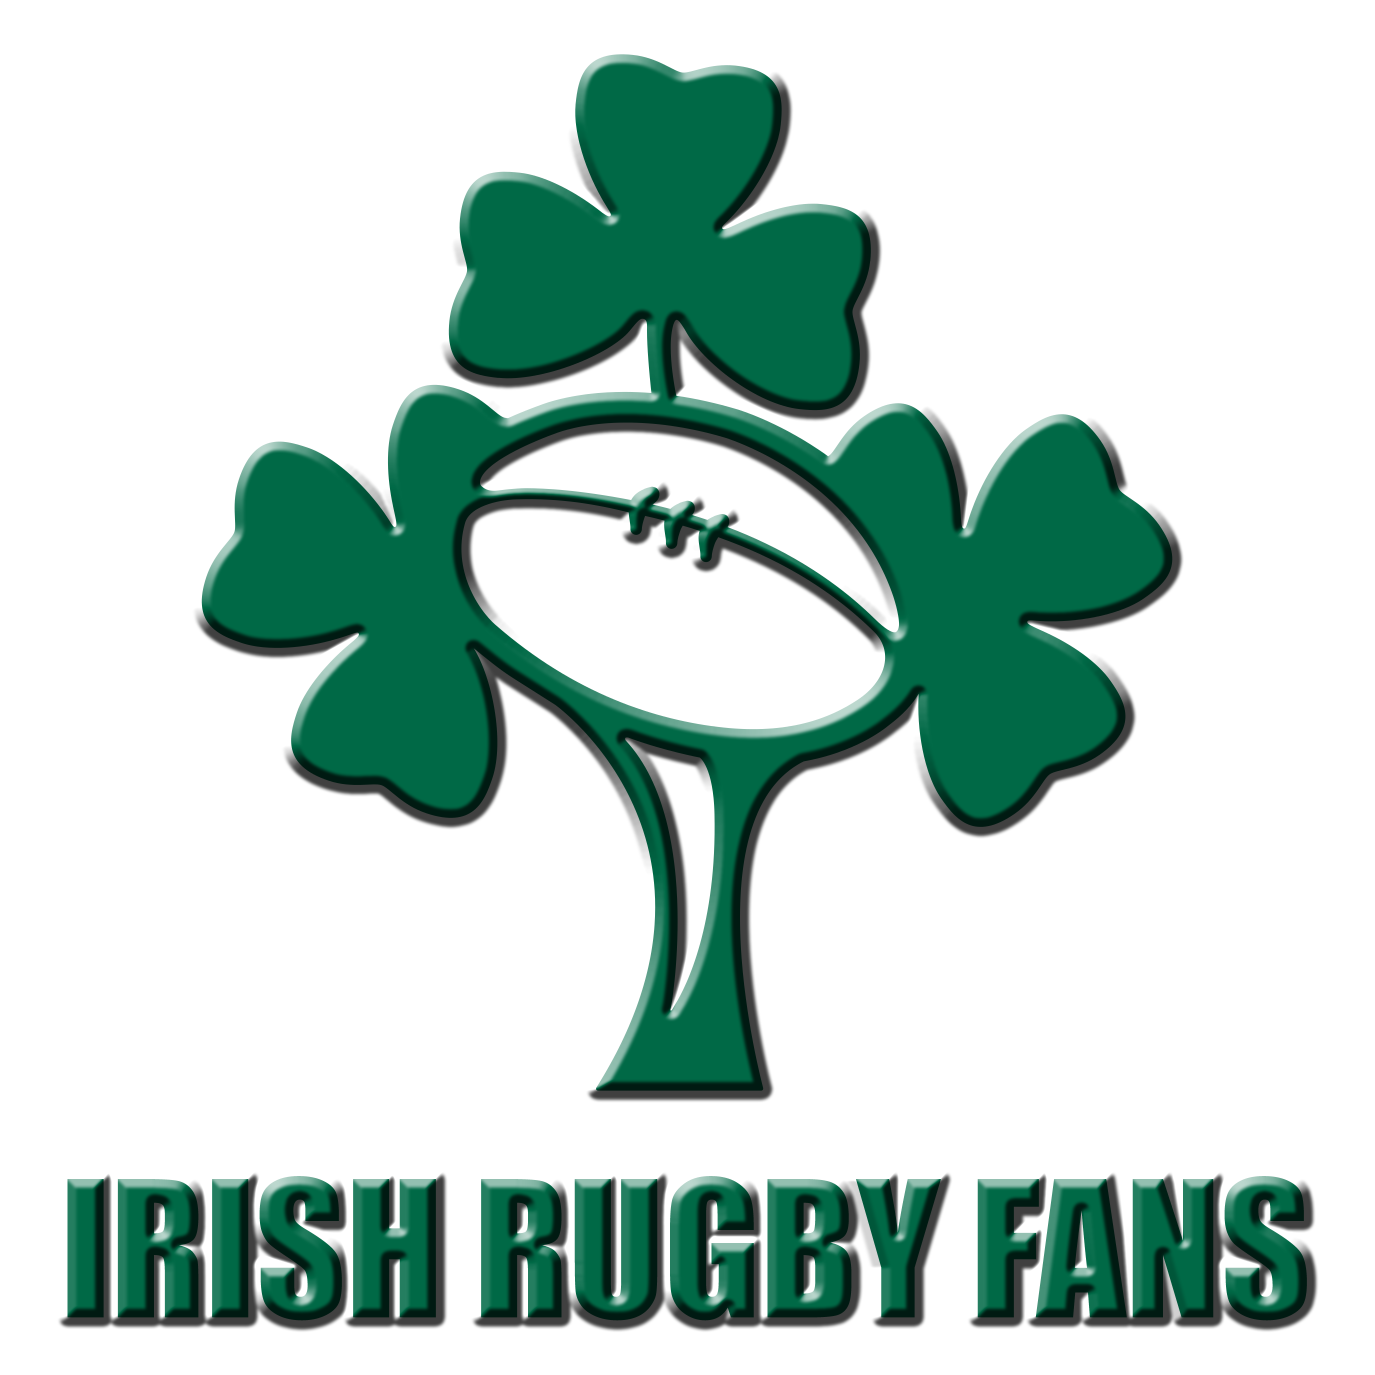 Irish Rugby Union Fan Club - Daily news & updates following Ireland on the road to the World Cup